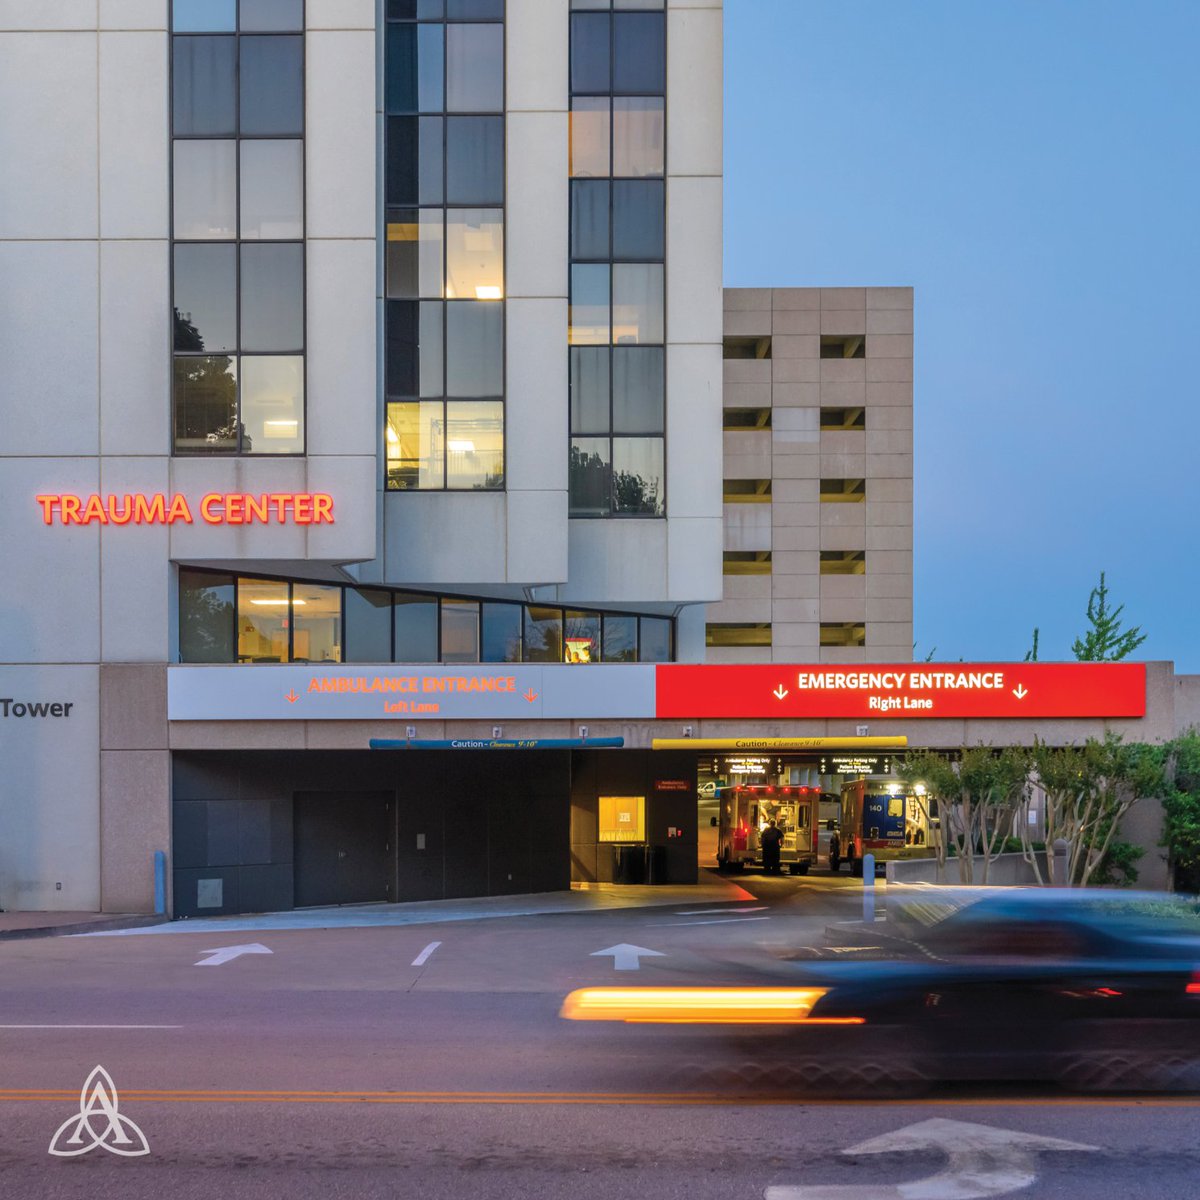 We hope you don’t need us, but if you do, our ER's are open 24/7. We'll connect the dots for any follow-up care you may need too! Visit ascn.io/6017b5yCc to find an ER location near you.